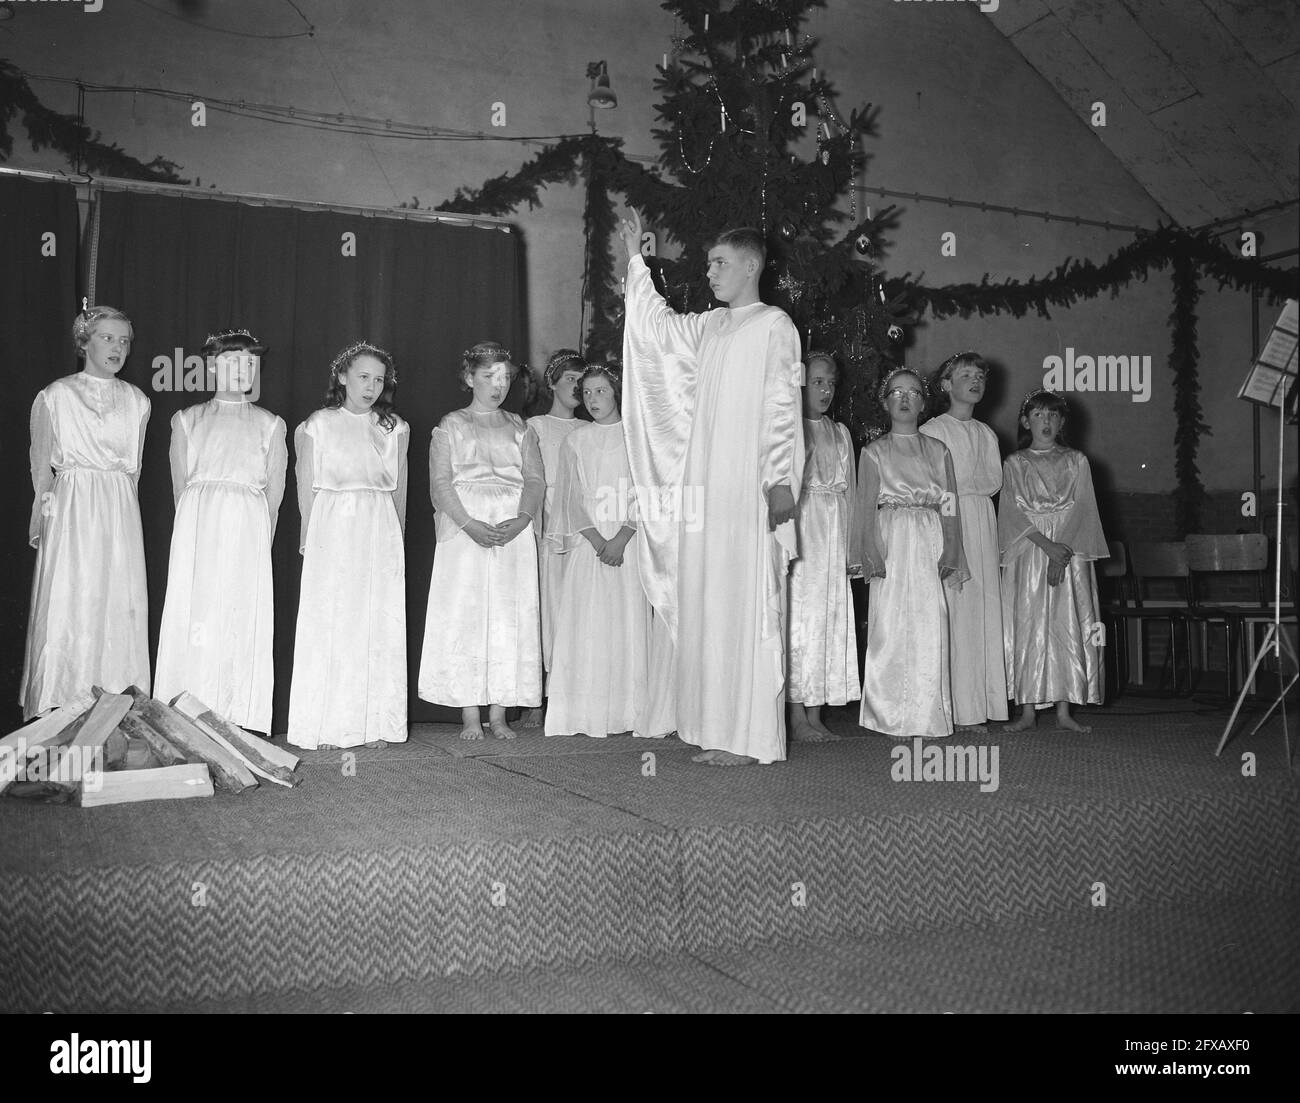 Christmas play at Palace Soestdijk (with Princess Marijke), December 21, 1957, CHRISTMAS PLAY, The Netherlands, 20th century press agency photo, news to remember, documentary, historic photography 1945-1990, visual stories, human history of the Twentieth Century, capturing moments in time Stock Photo